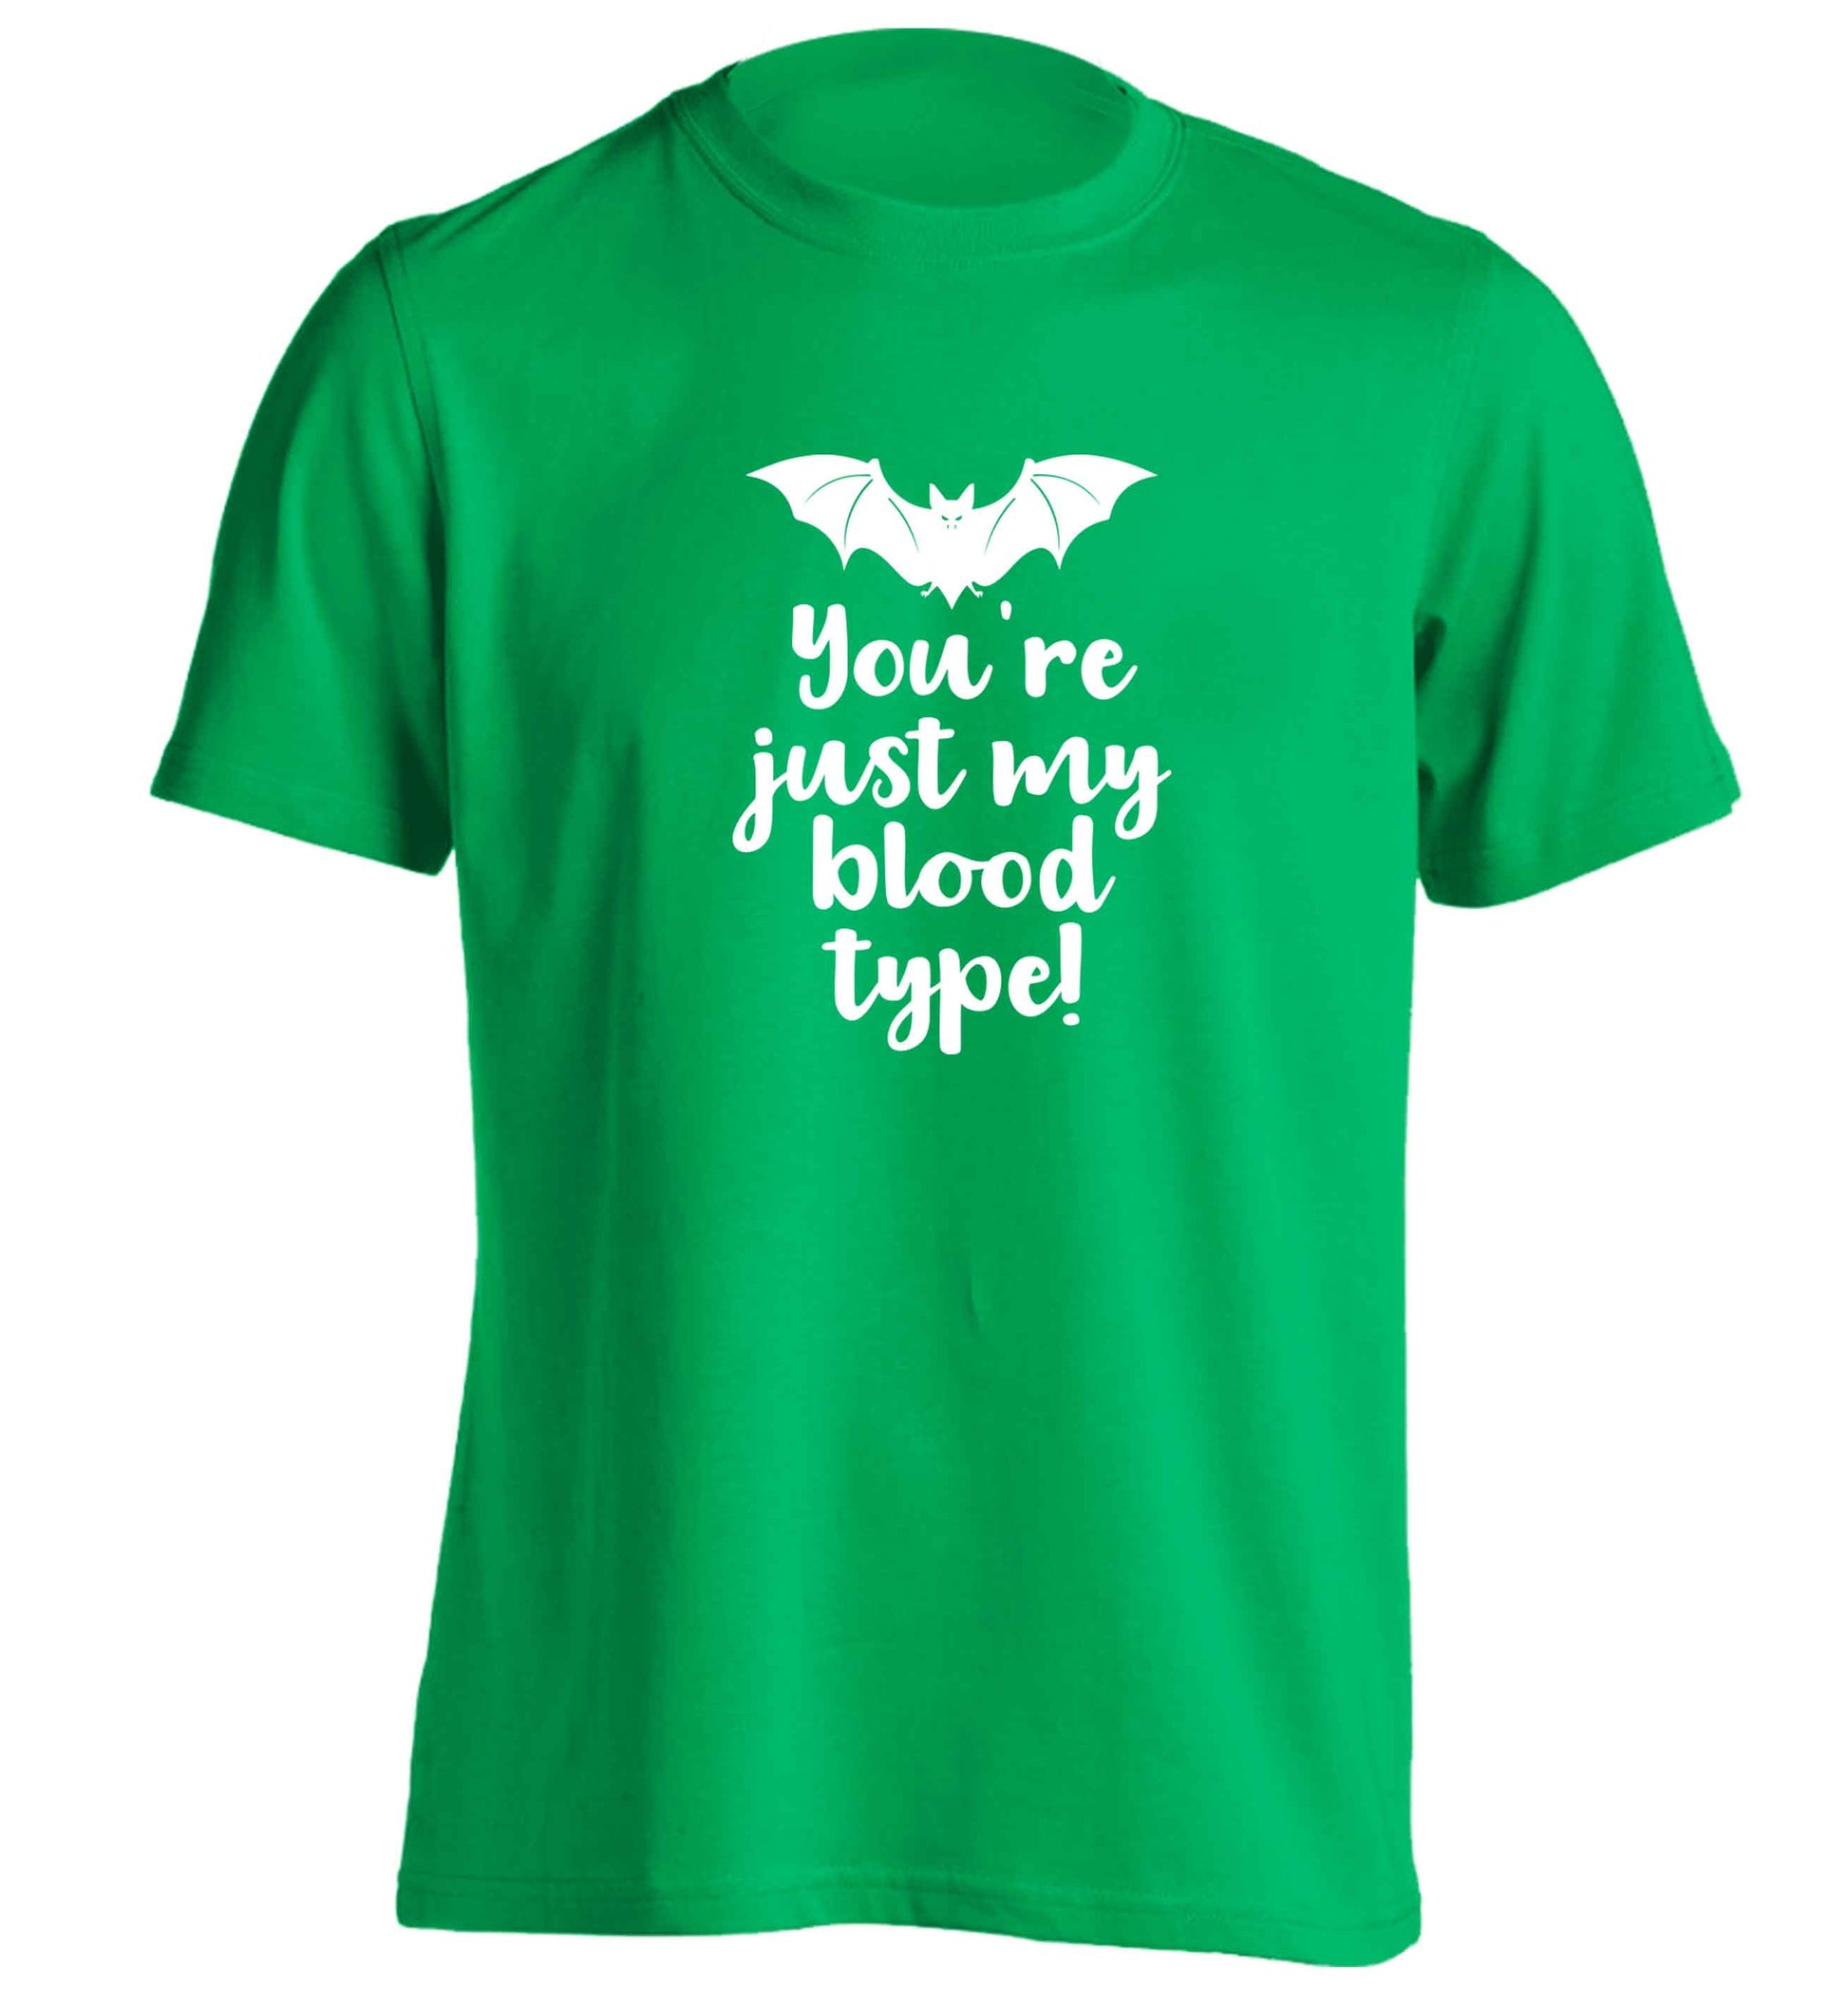 You're just my blood type adults unisex green Tshirt 2XL